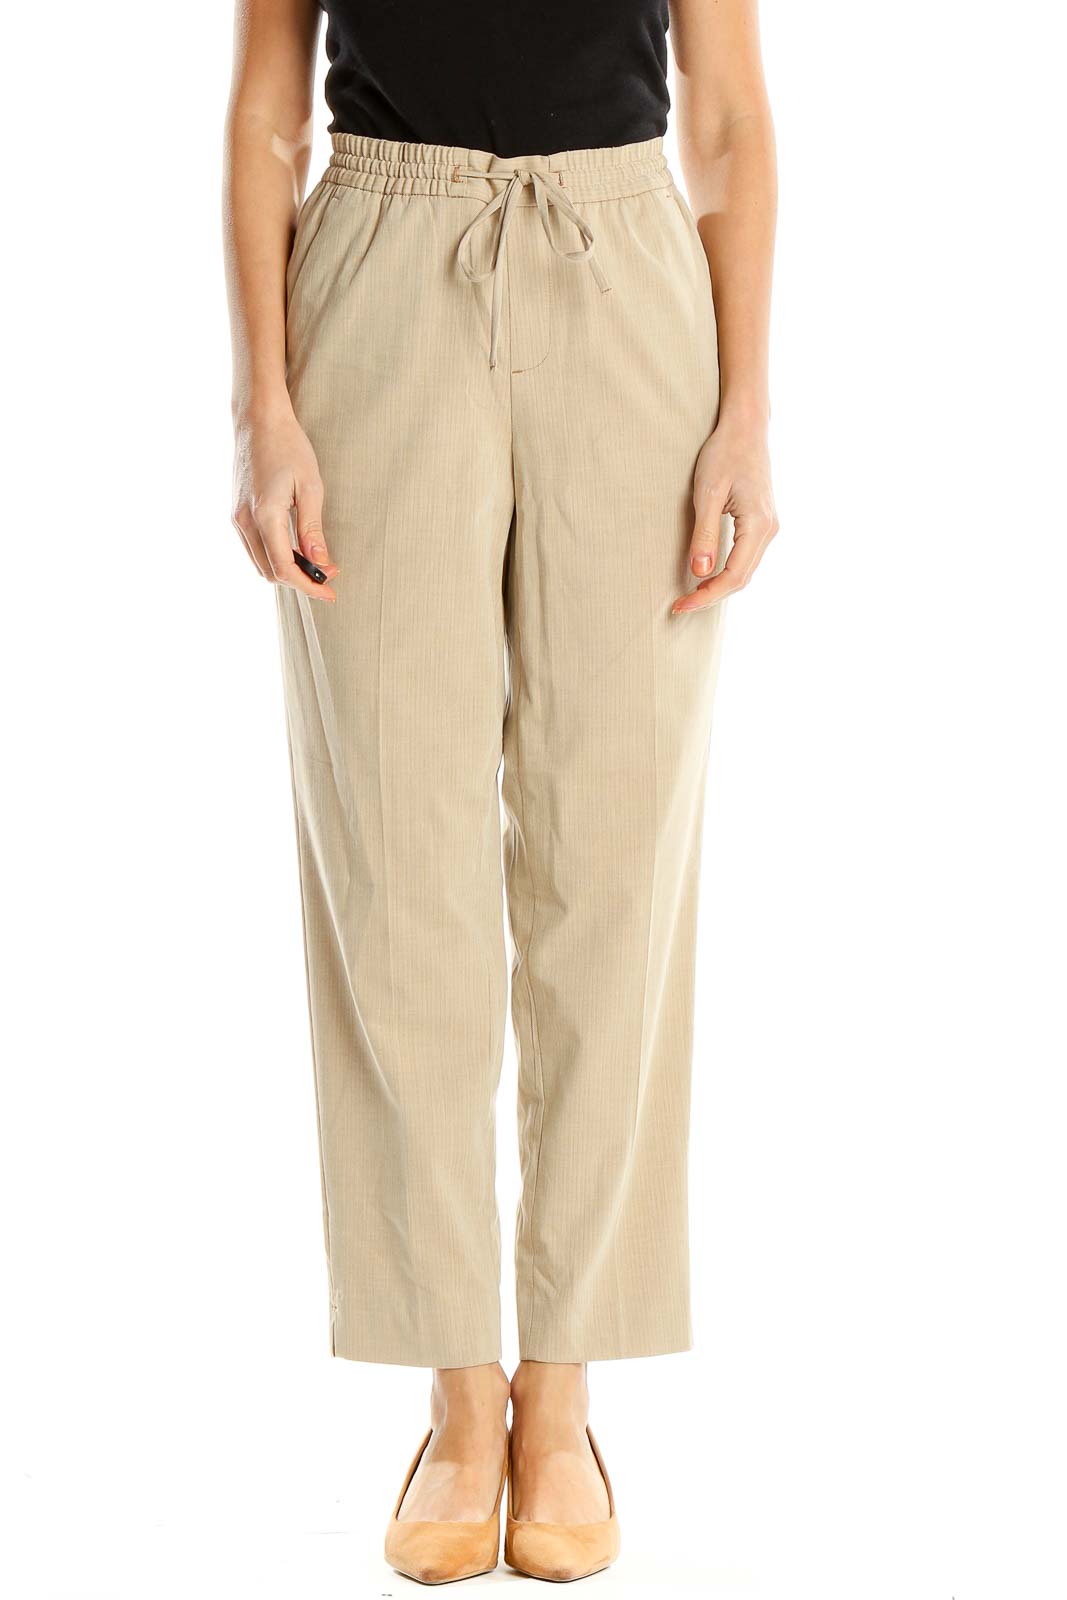 Beige Casual Drawstring Pants Front